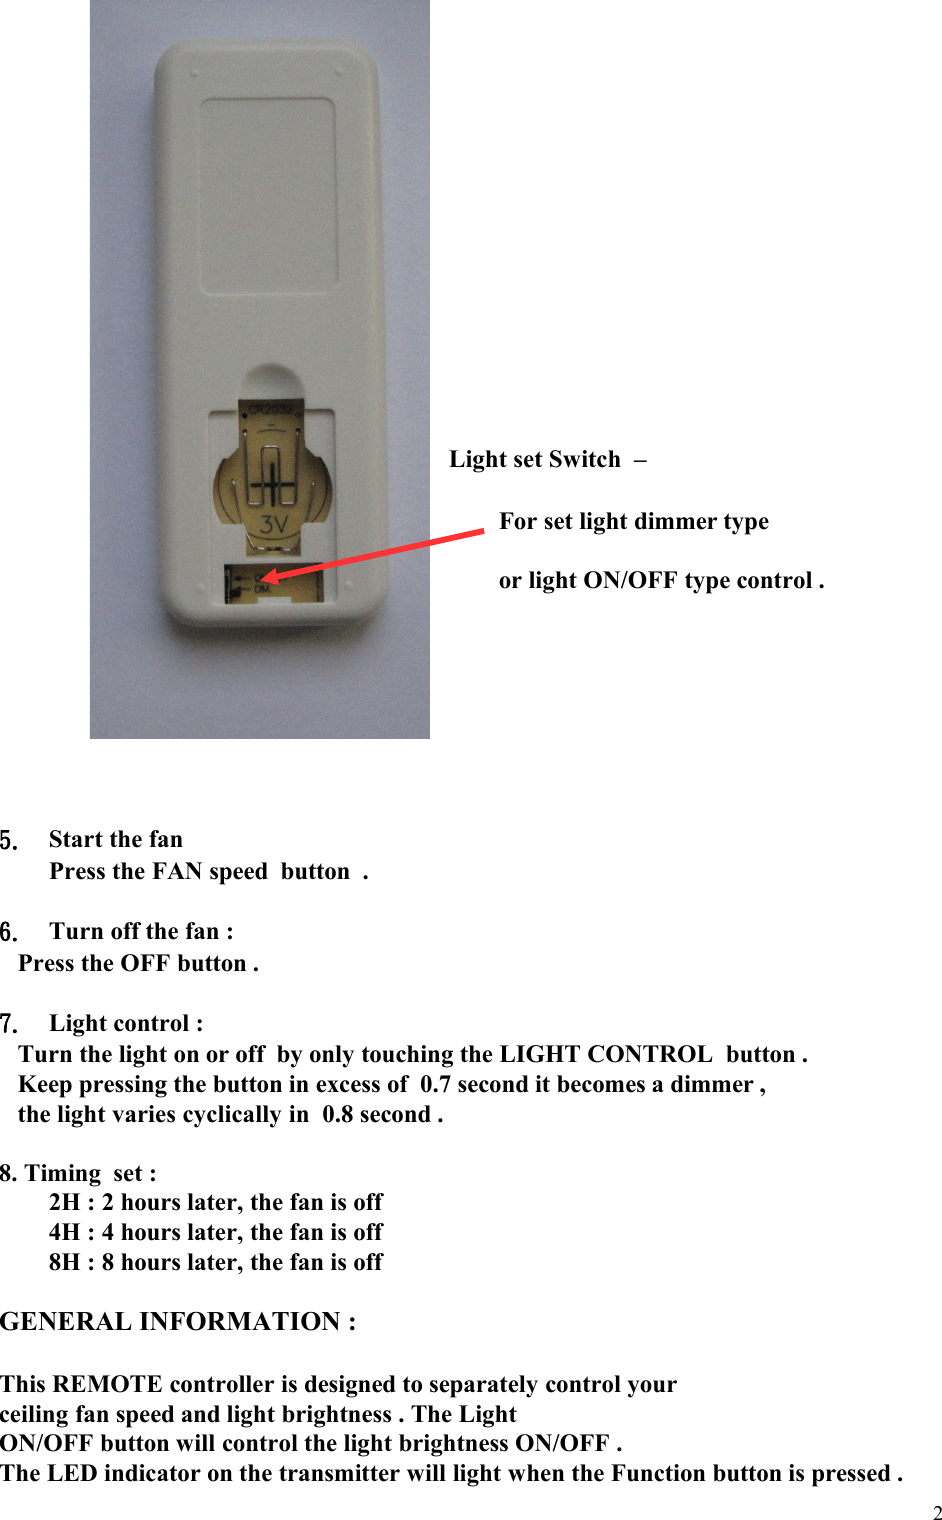                                                                         Light set Switch  –                                                                       For set light dimmer type  or light ON/OFF type control . 5. Start the fan Press the FAN speed  button  .6. Turn off the fan :Press the OFF button .7. Light control :Turn the light on or off  by only touching the LIGHT CONTROL  button .Keep pressing the button in excess of  0.7 second it becomes a dimmer ,the light varies cyclically in  0.8 second .8. Timing  set : 2H : 2 hours later, the fan is off4H : 4 hours later, the fan is off8H : 8 hours later, the fan is offGENERAL INFORMATION :This REMOTE controller is designed to separately control your ceiling fan speed and light brightness . The Light  ON/OFF button will control the light brightness ON/OFF .The LED indicator on the transmitter will light when the Function button is pressed .2